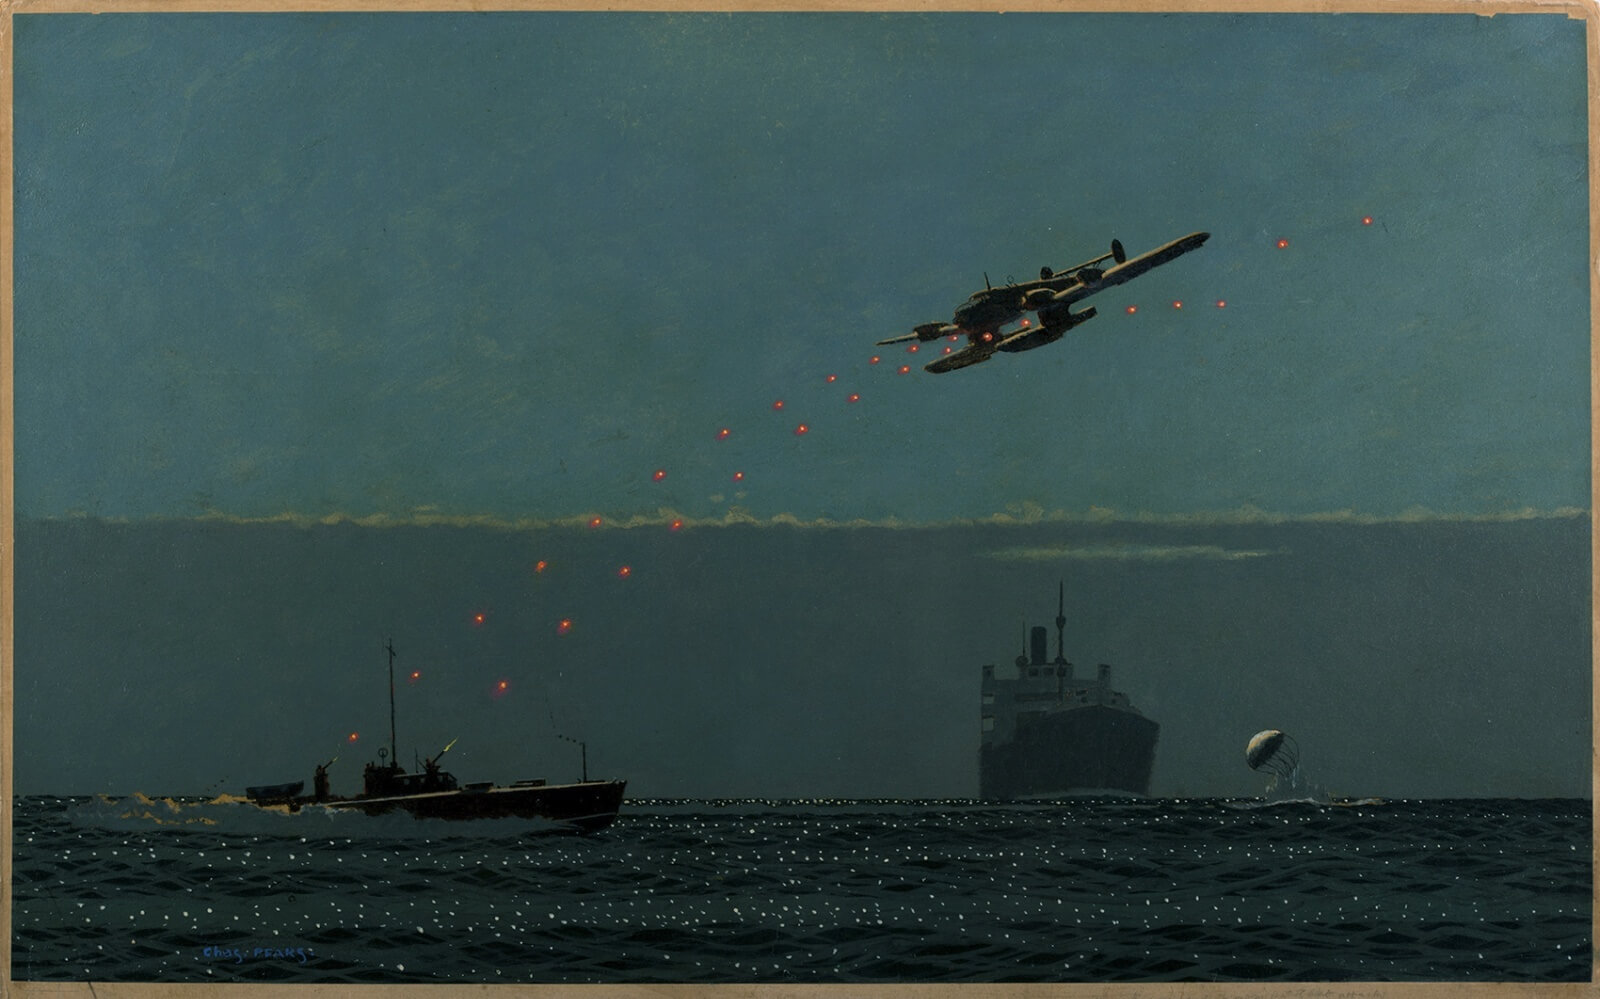 Charles Pears - The Mosquite and the Eagle: A Nazi seaplane drops a mine in the Fairway